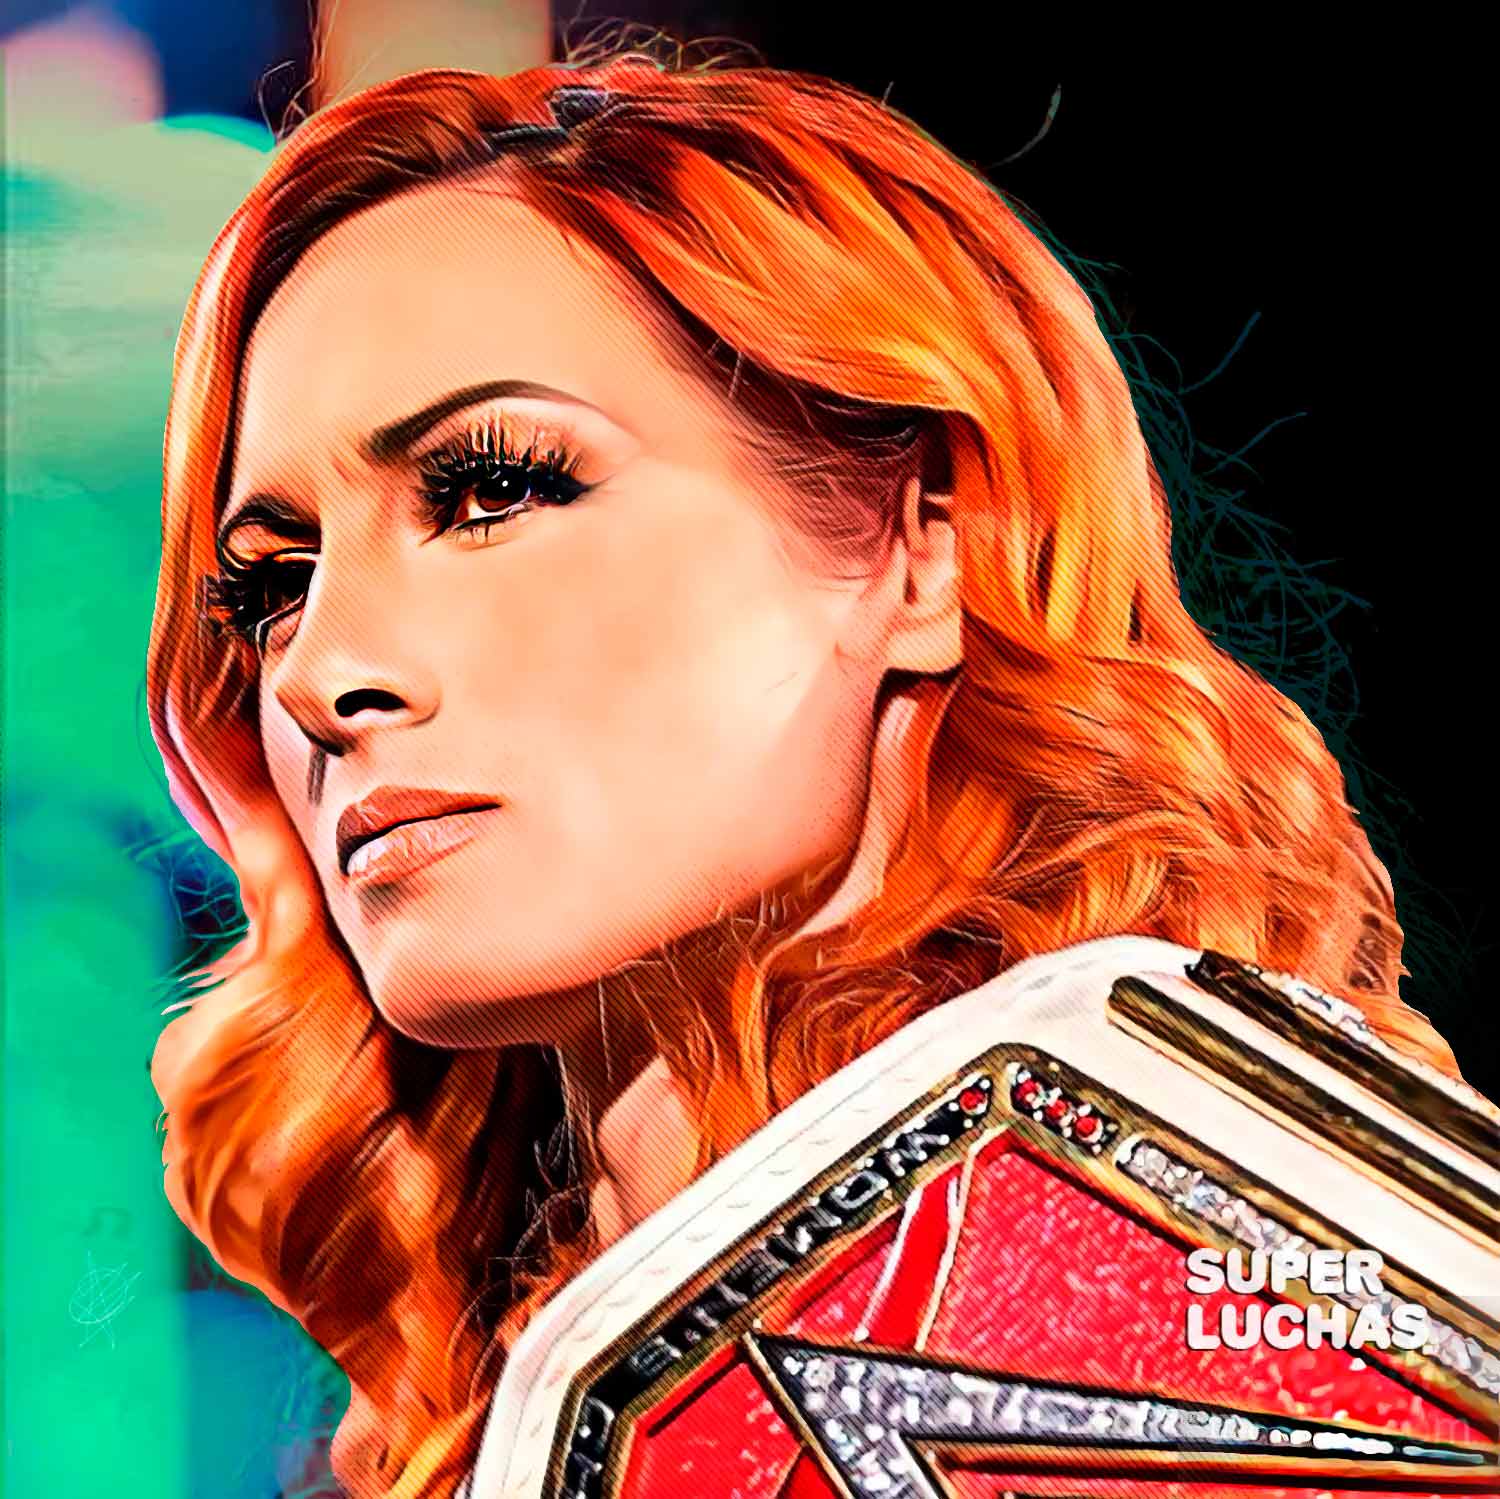 1638516133 Becky Lynch met important milestone as champion in WWE